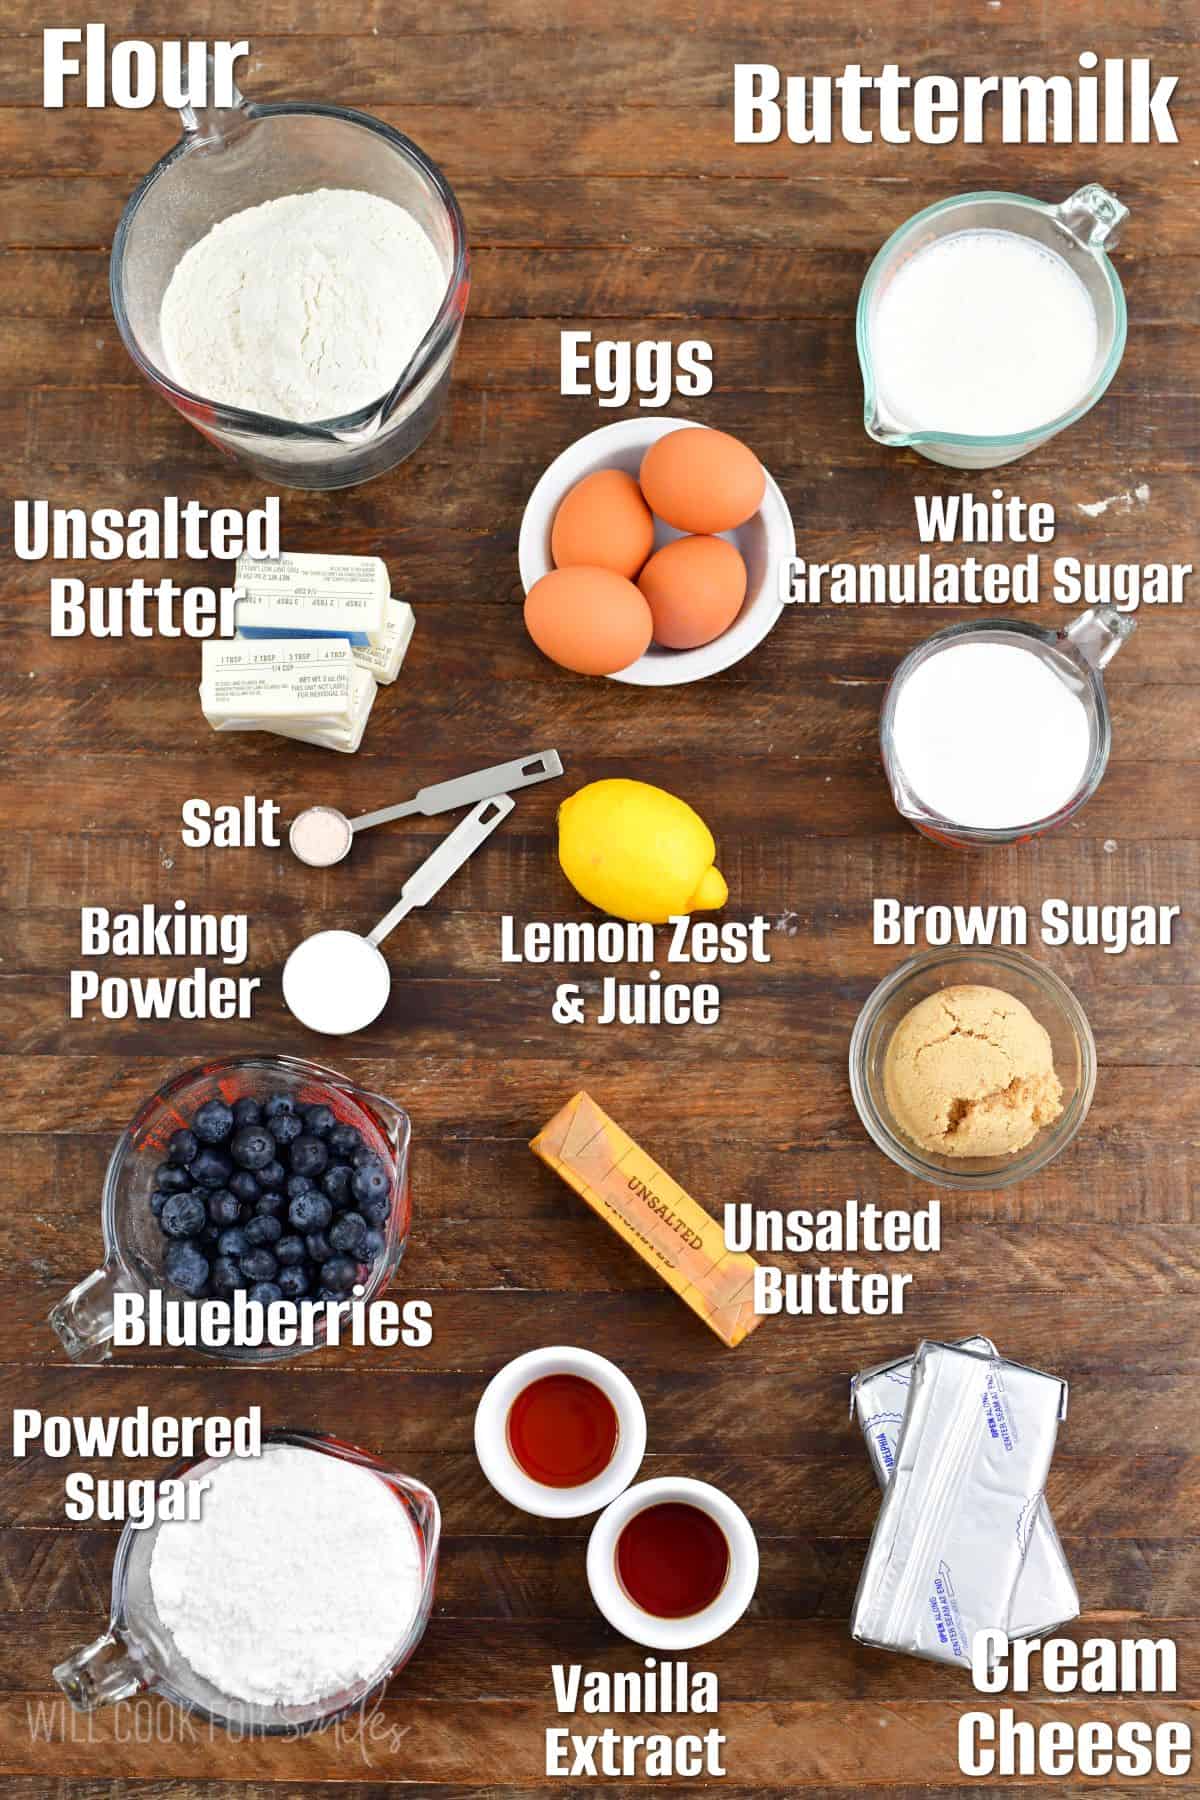 Labeled ingredients for blueberry cake on a wood cutting board.